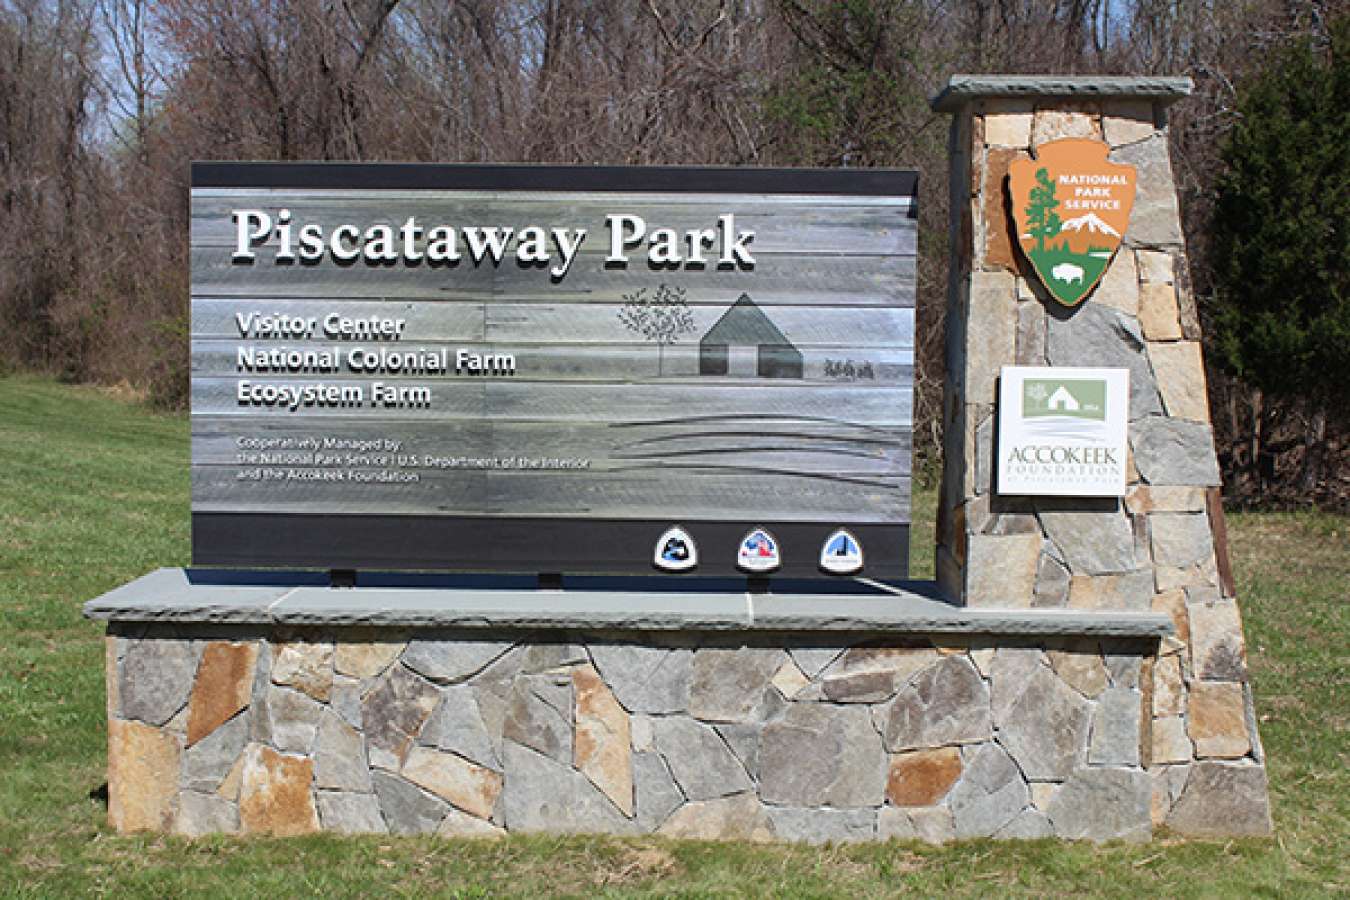 Accokeek Entry : Monument Style Entry Sign to Piscataway Park. A NPS Site Created to Preserve the Scenic View form Mount Vernon, across the Potomac River